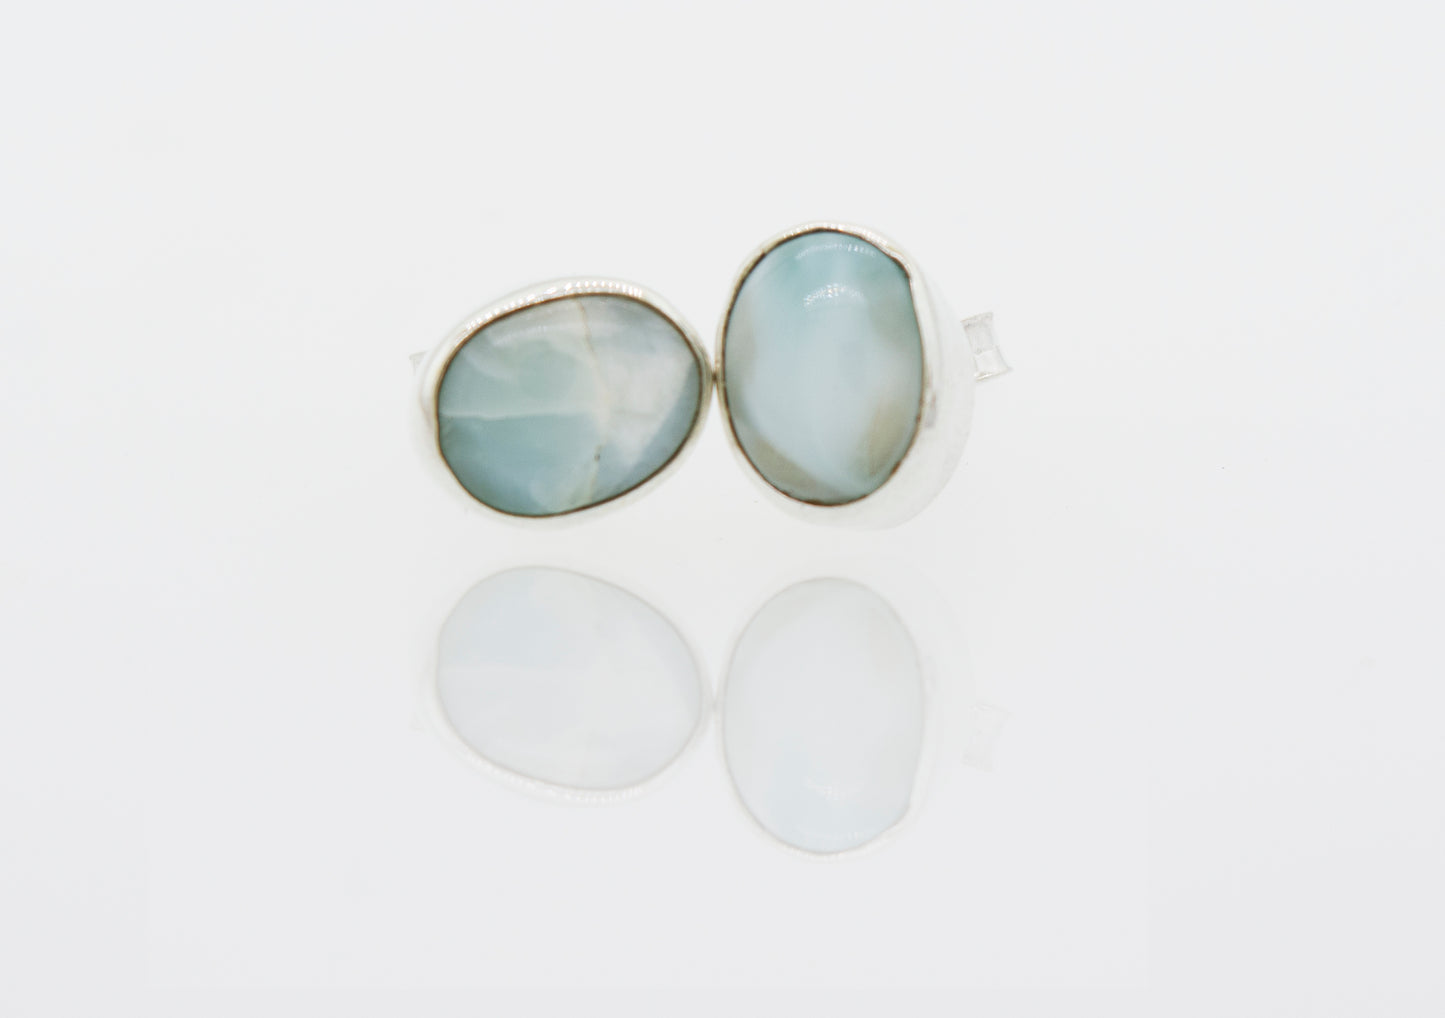 A pair of elegant Super Silver Larimar Studs with a beautiful blue stone.